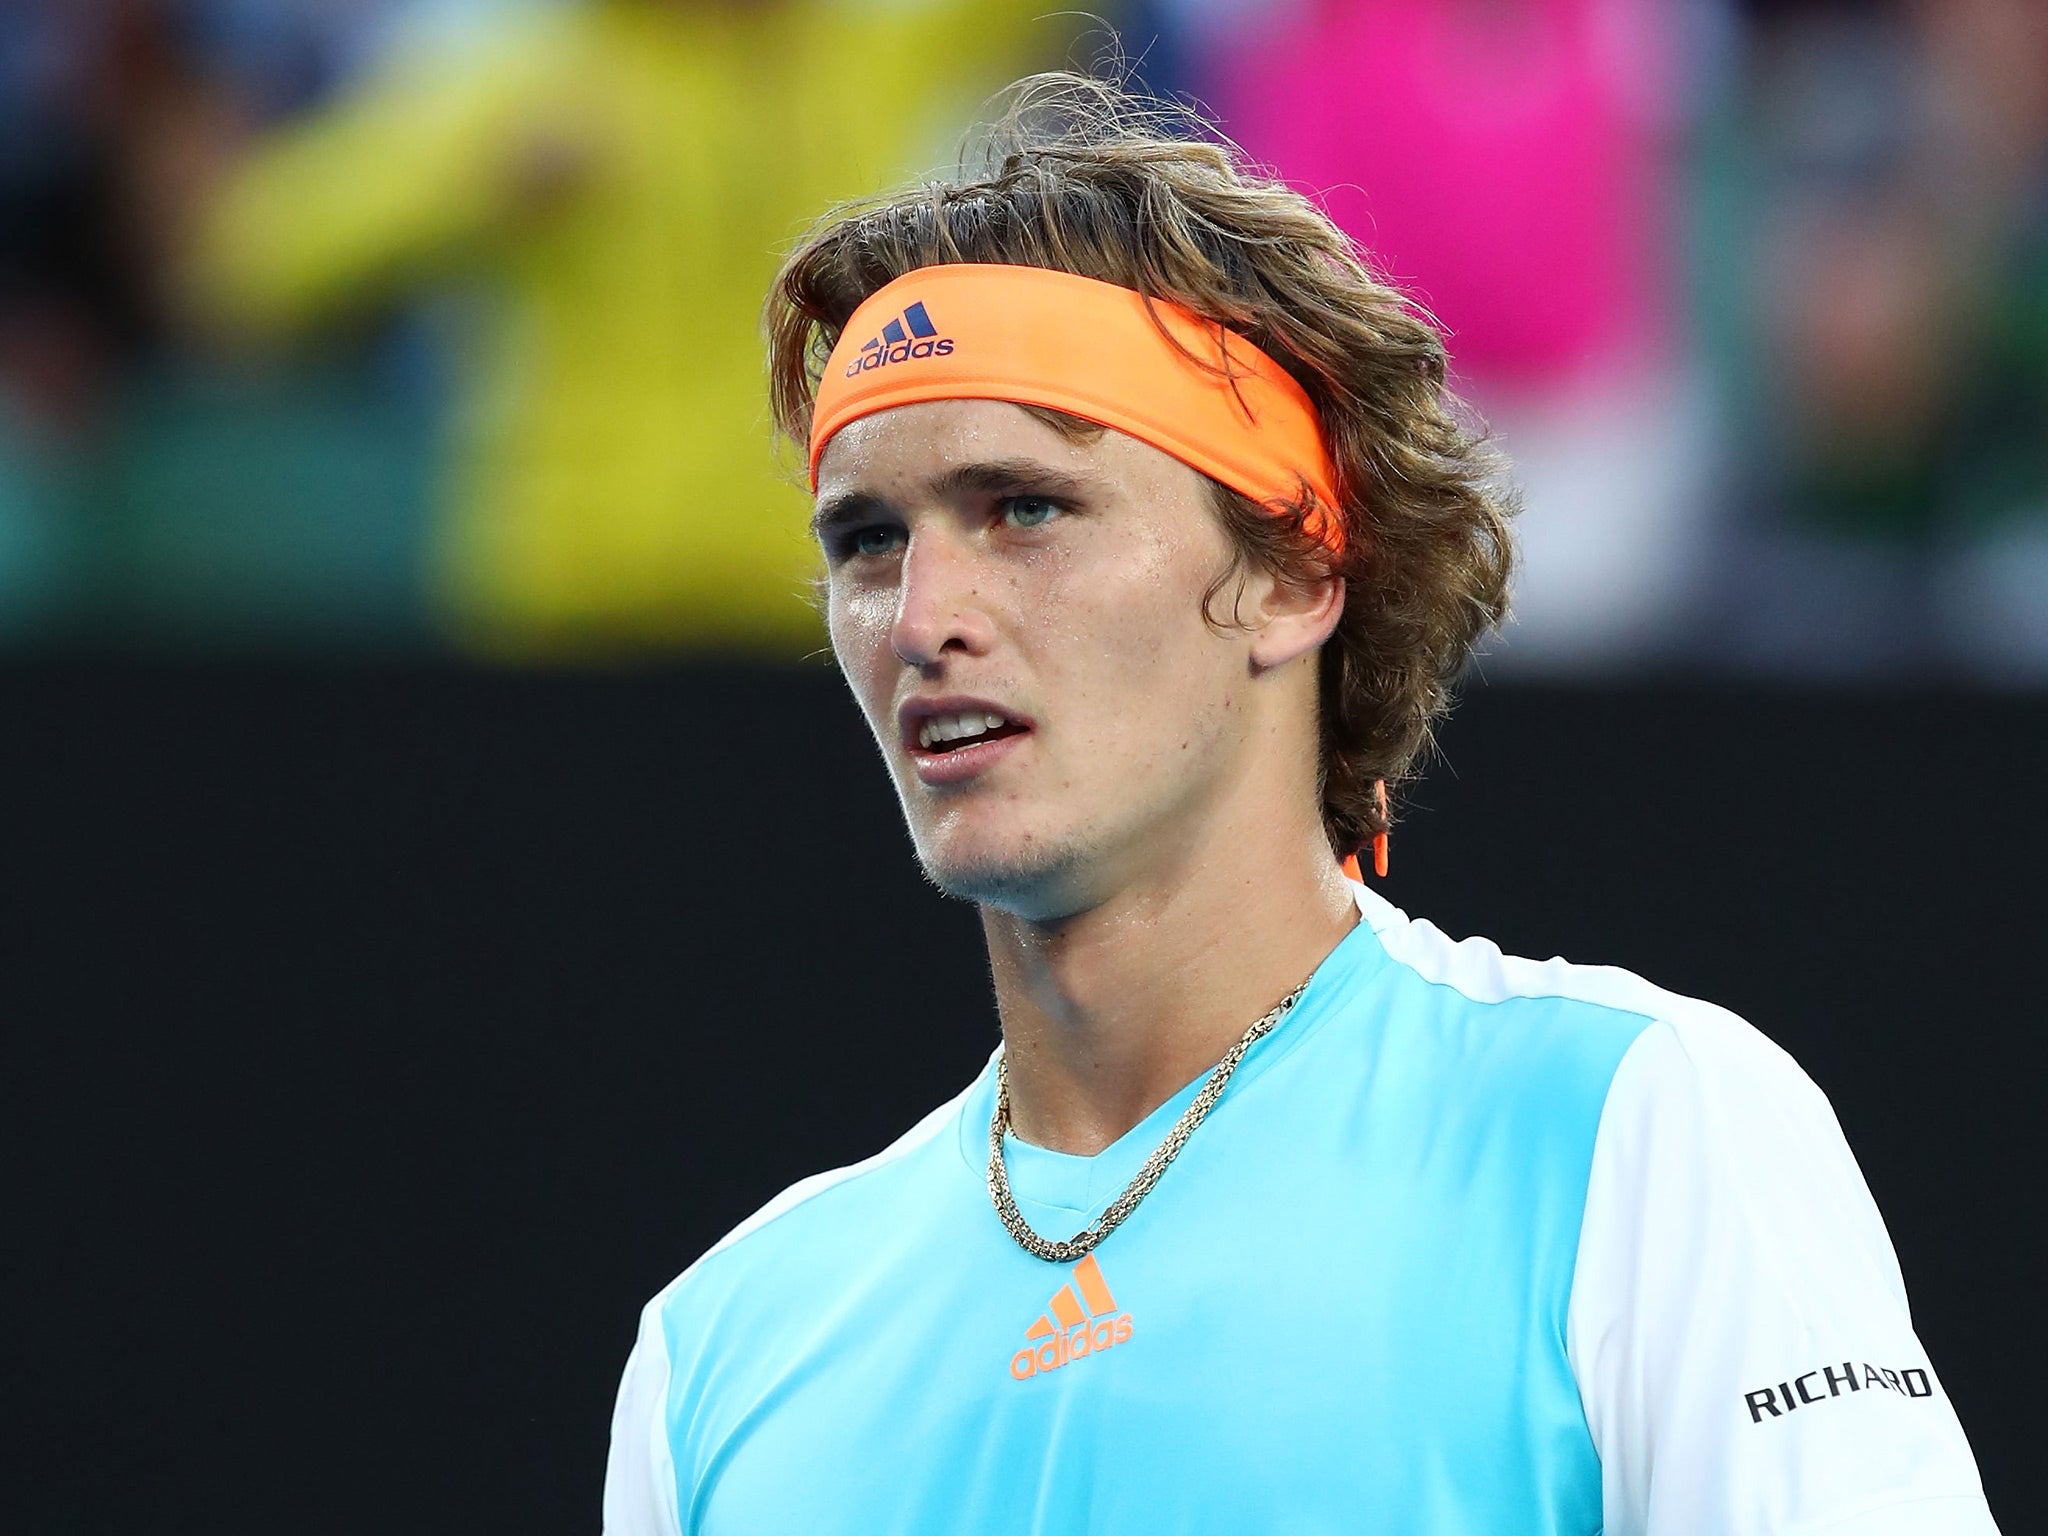 Alexander Zverev is one of an exciting, new generation